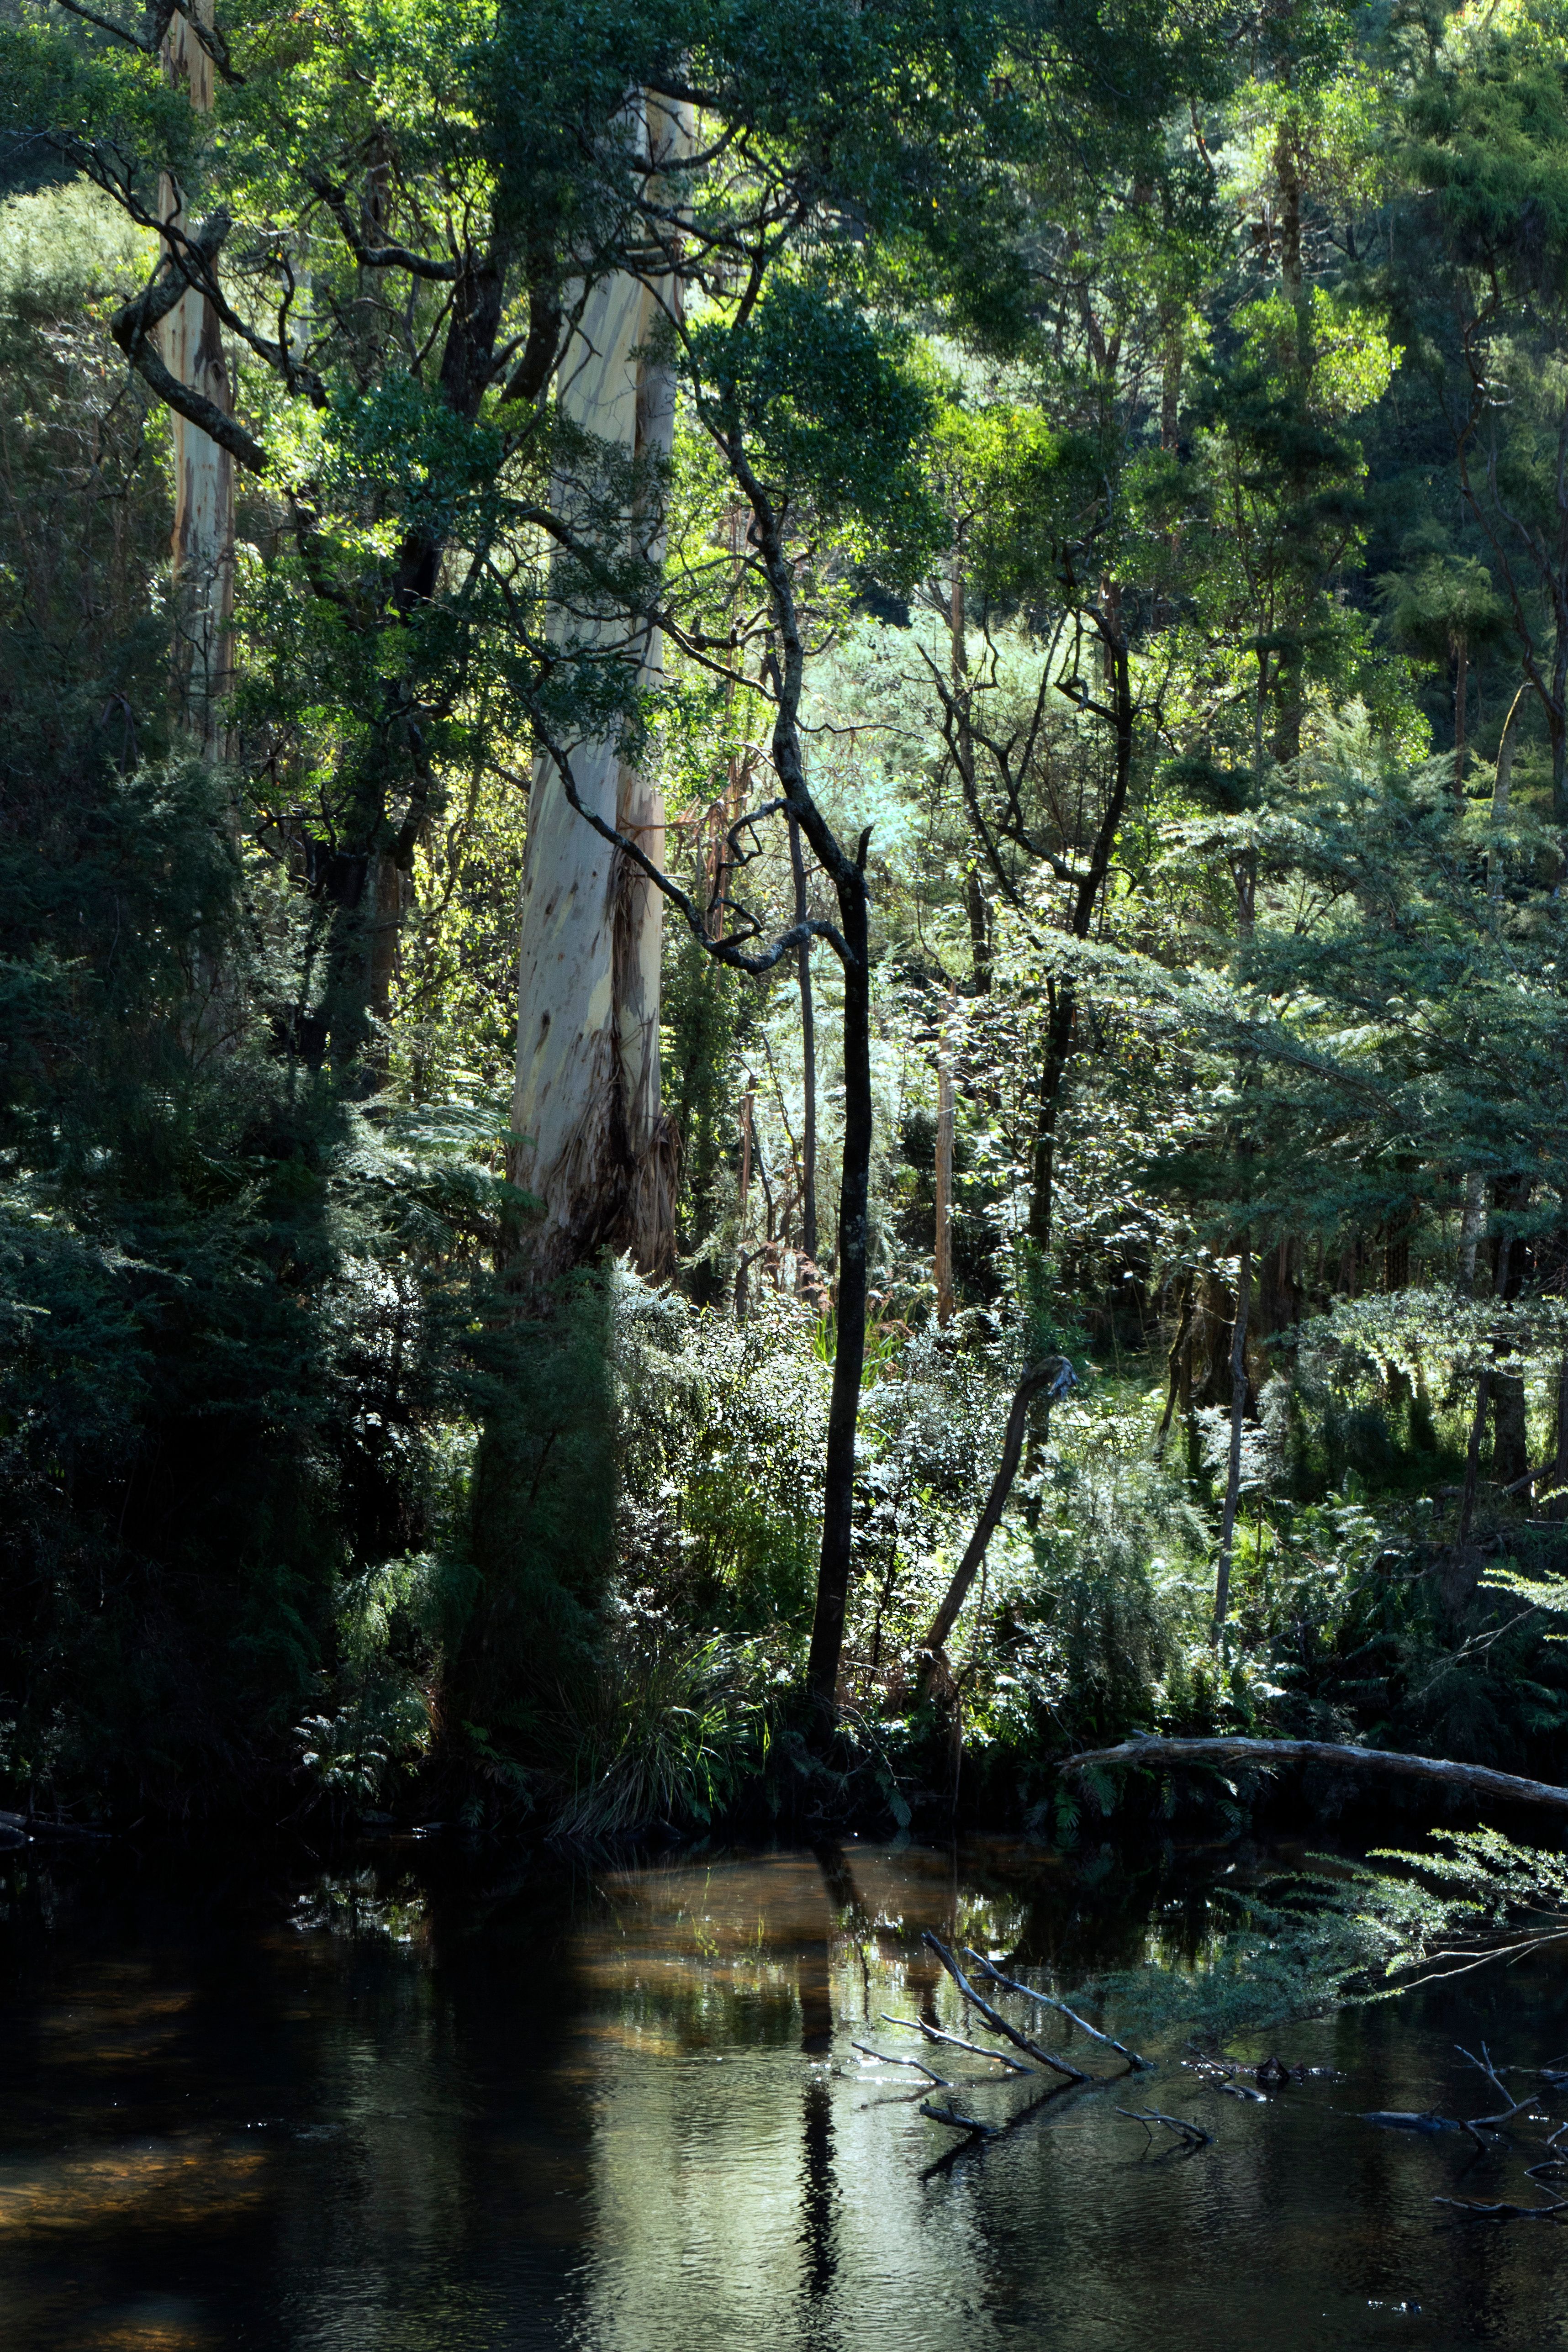 A photograph of a dark, still river surrounded by tall trees, ferns and other shrubs.